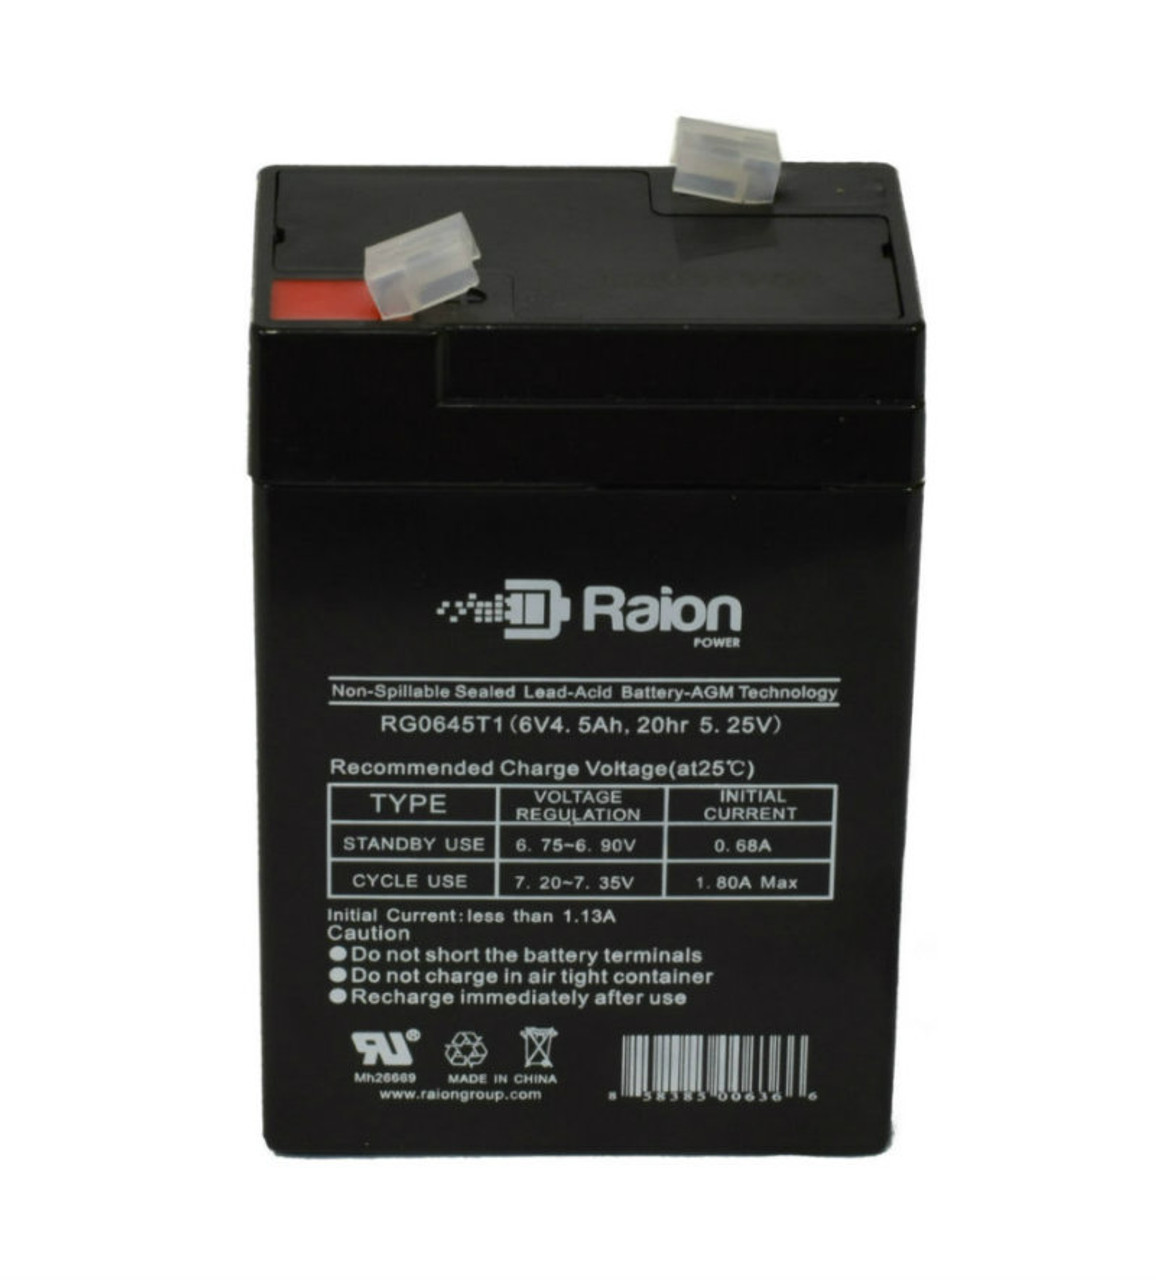 Raion Power RG0645T1 Replacement Battery Cartridge for Leader CT4.5-6